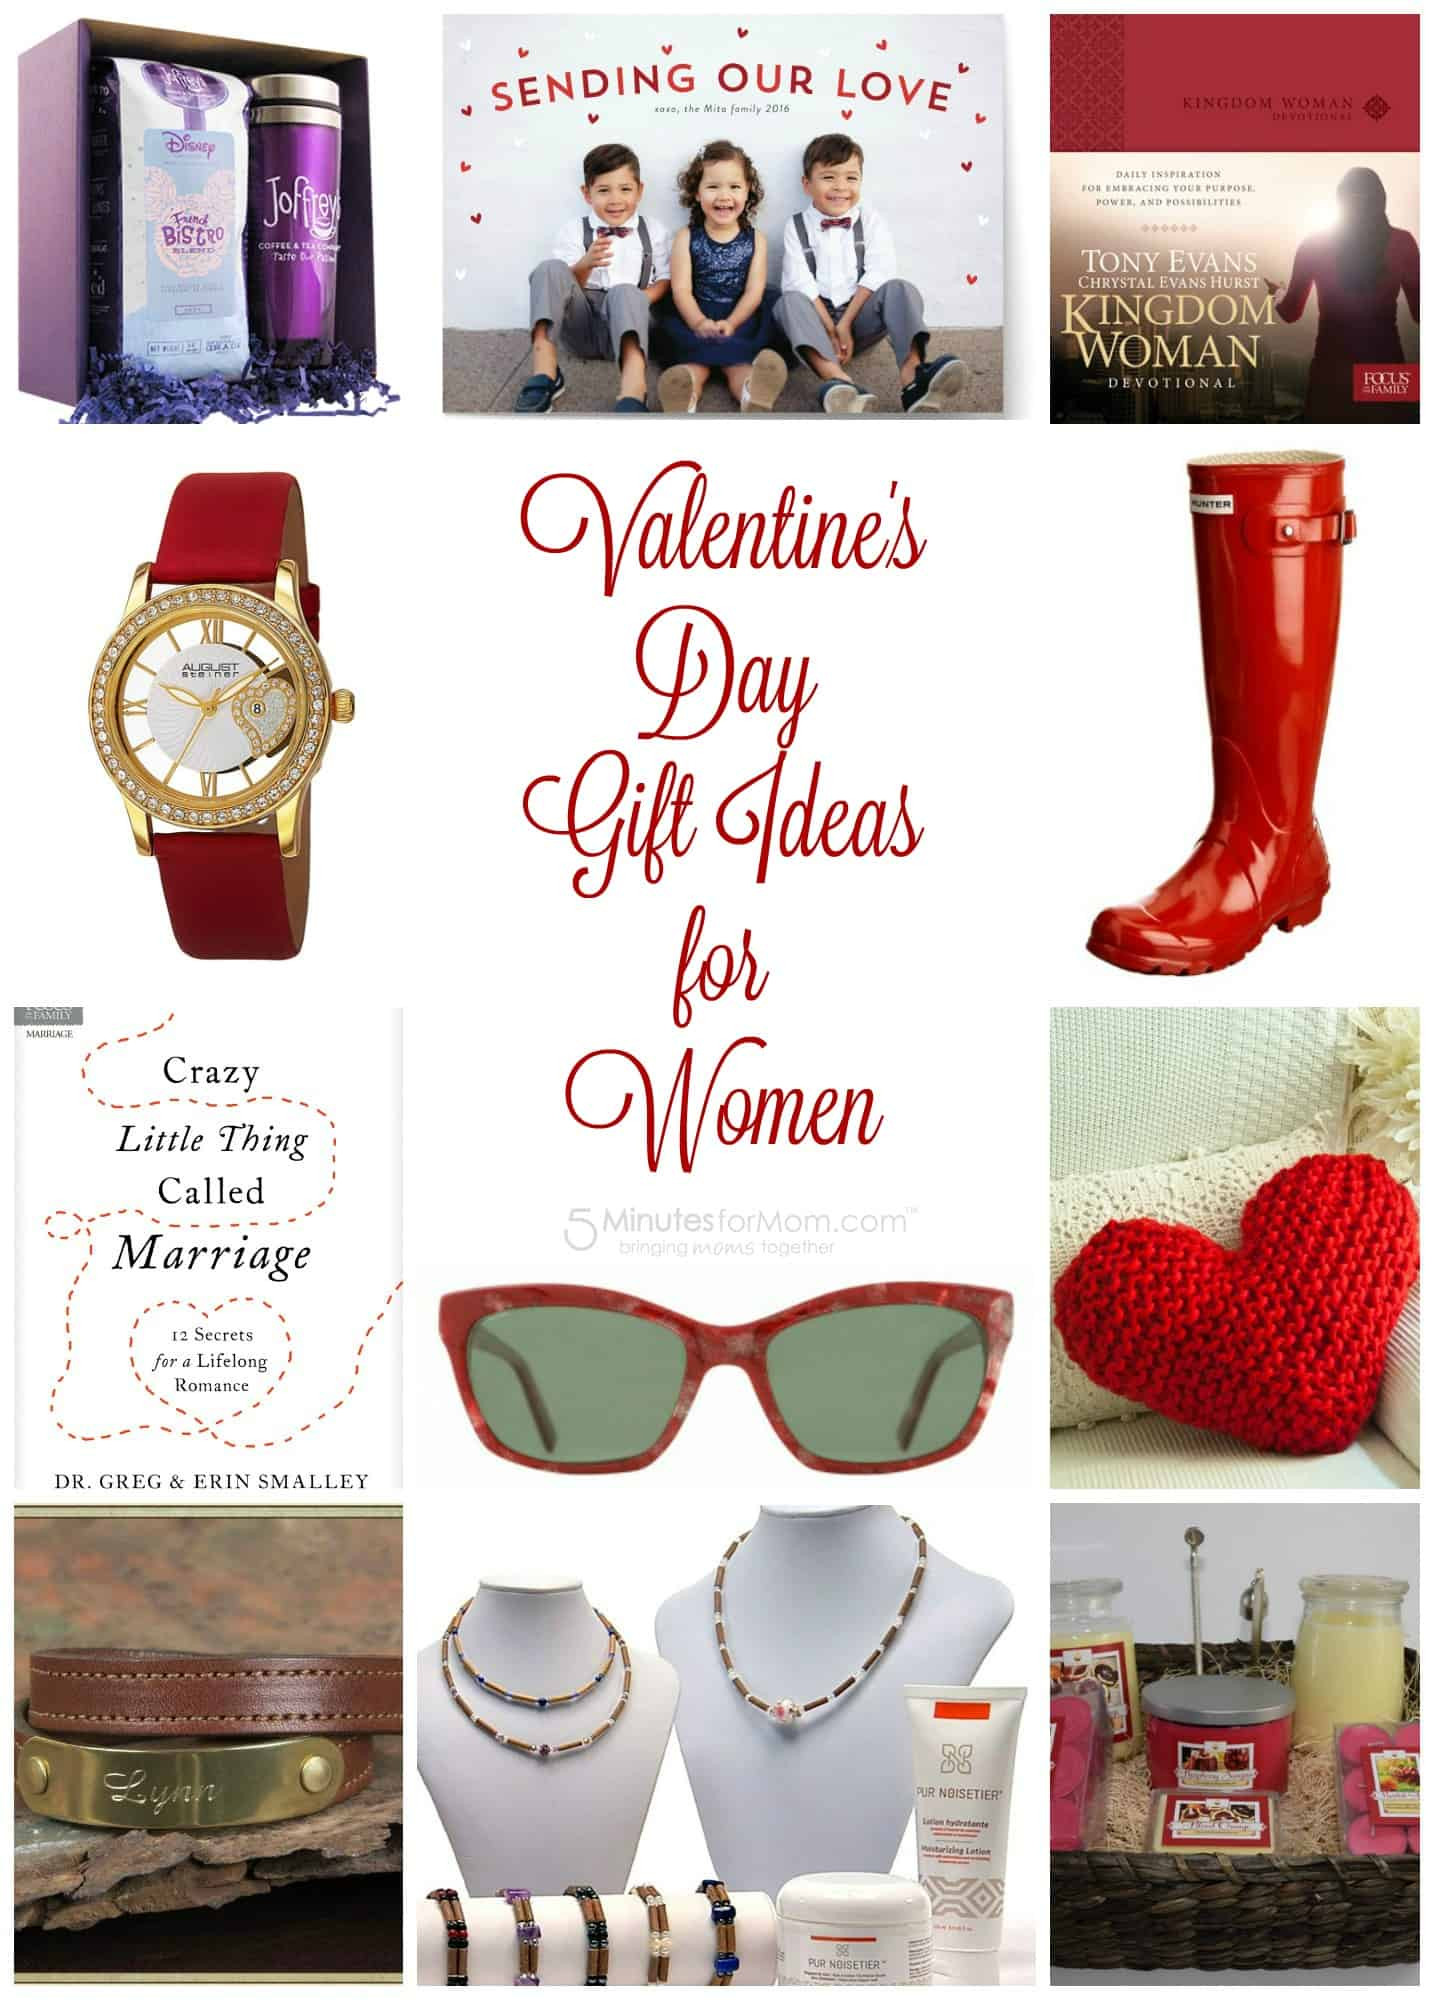 Valentine Day Gift Ideas for Women New Valentine S Day Gift Guide for Women Plus $100 Amazon